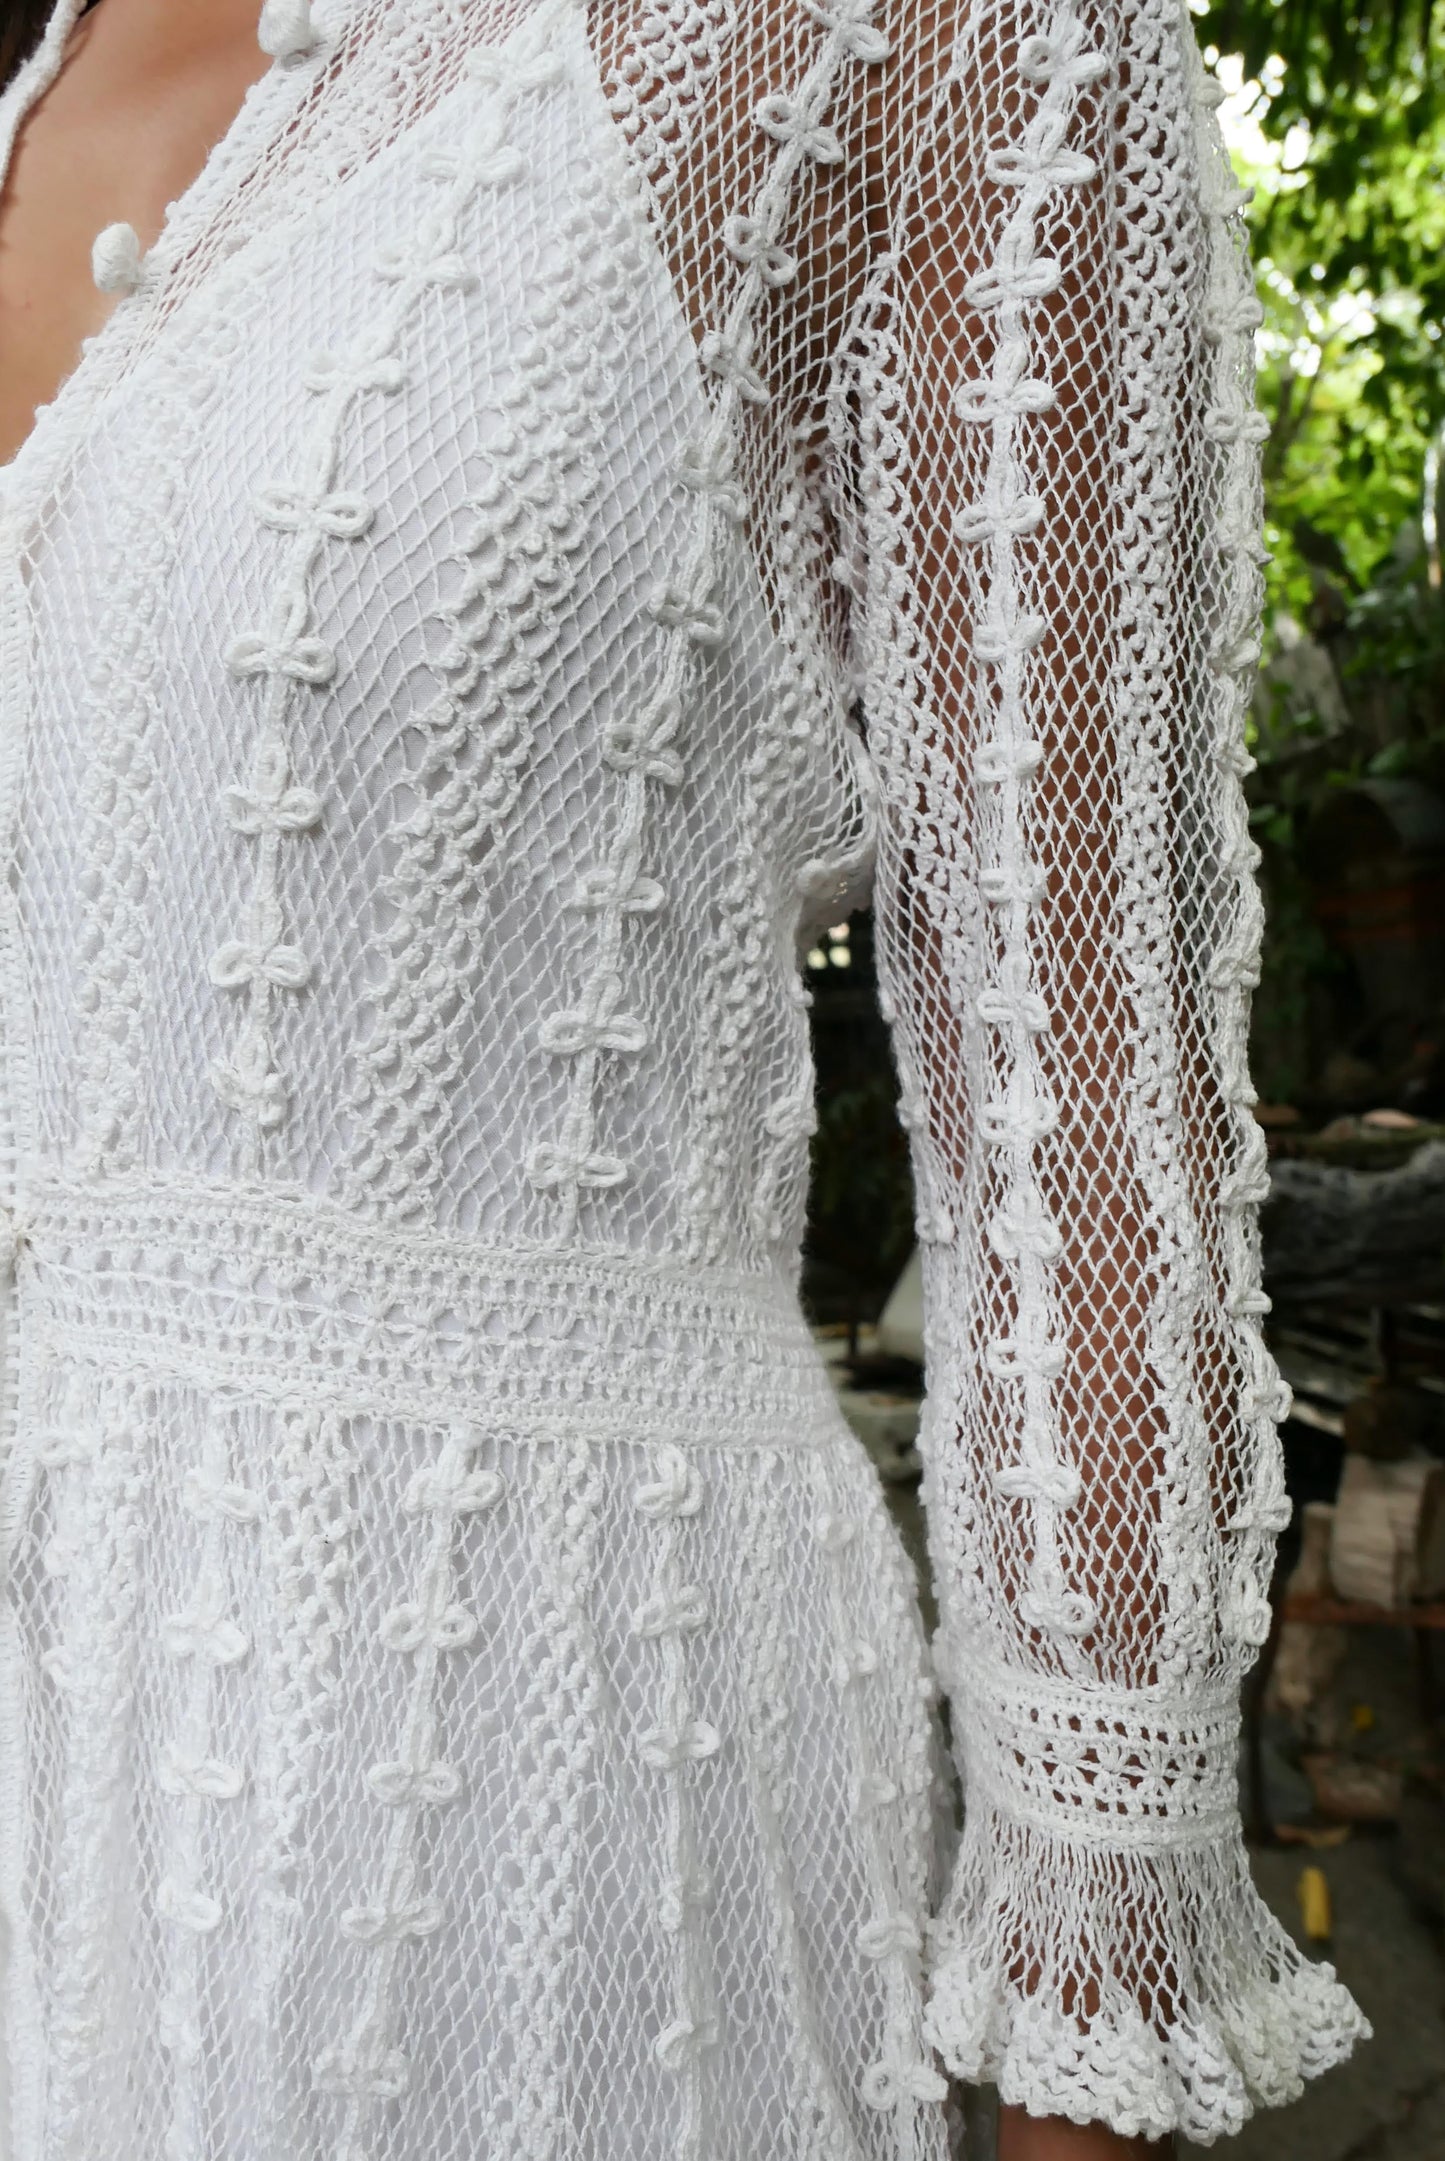 Closeup of sleeve. Ruffles out from the wrist. Lim's Vintage original crochet cottage core style dress. This dreamy midi length dress can be worn buttoned up the front or back and is made with very fine threads, making the dress refined and sheer. Detailed crochet trim is used for the waist, hemline, and 3/4 length ruffled sleeves. Wear it with a natural or pink colored slip or bandeau bra and bikini shorts and a pair of ankle or knee-high boots to complete the look.